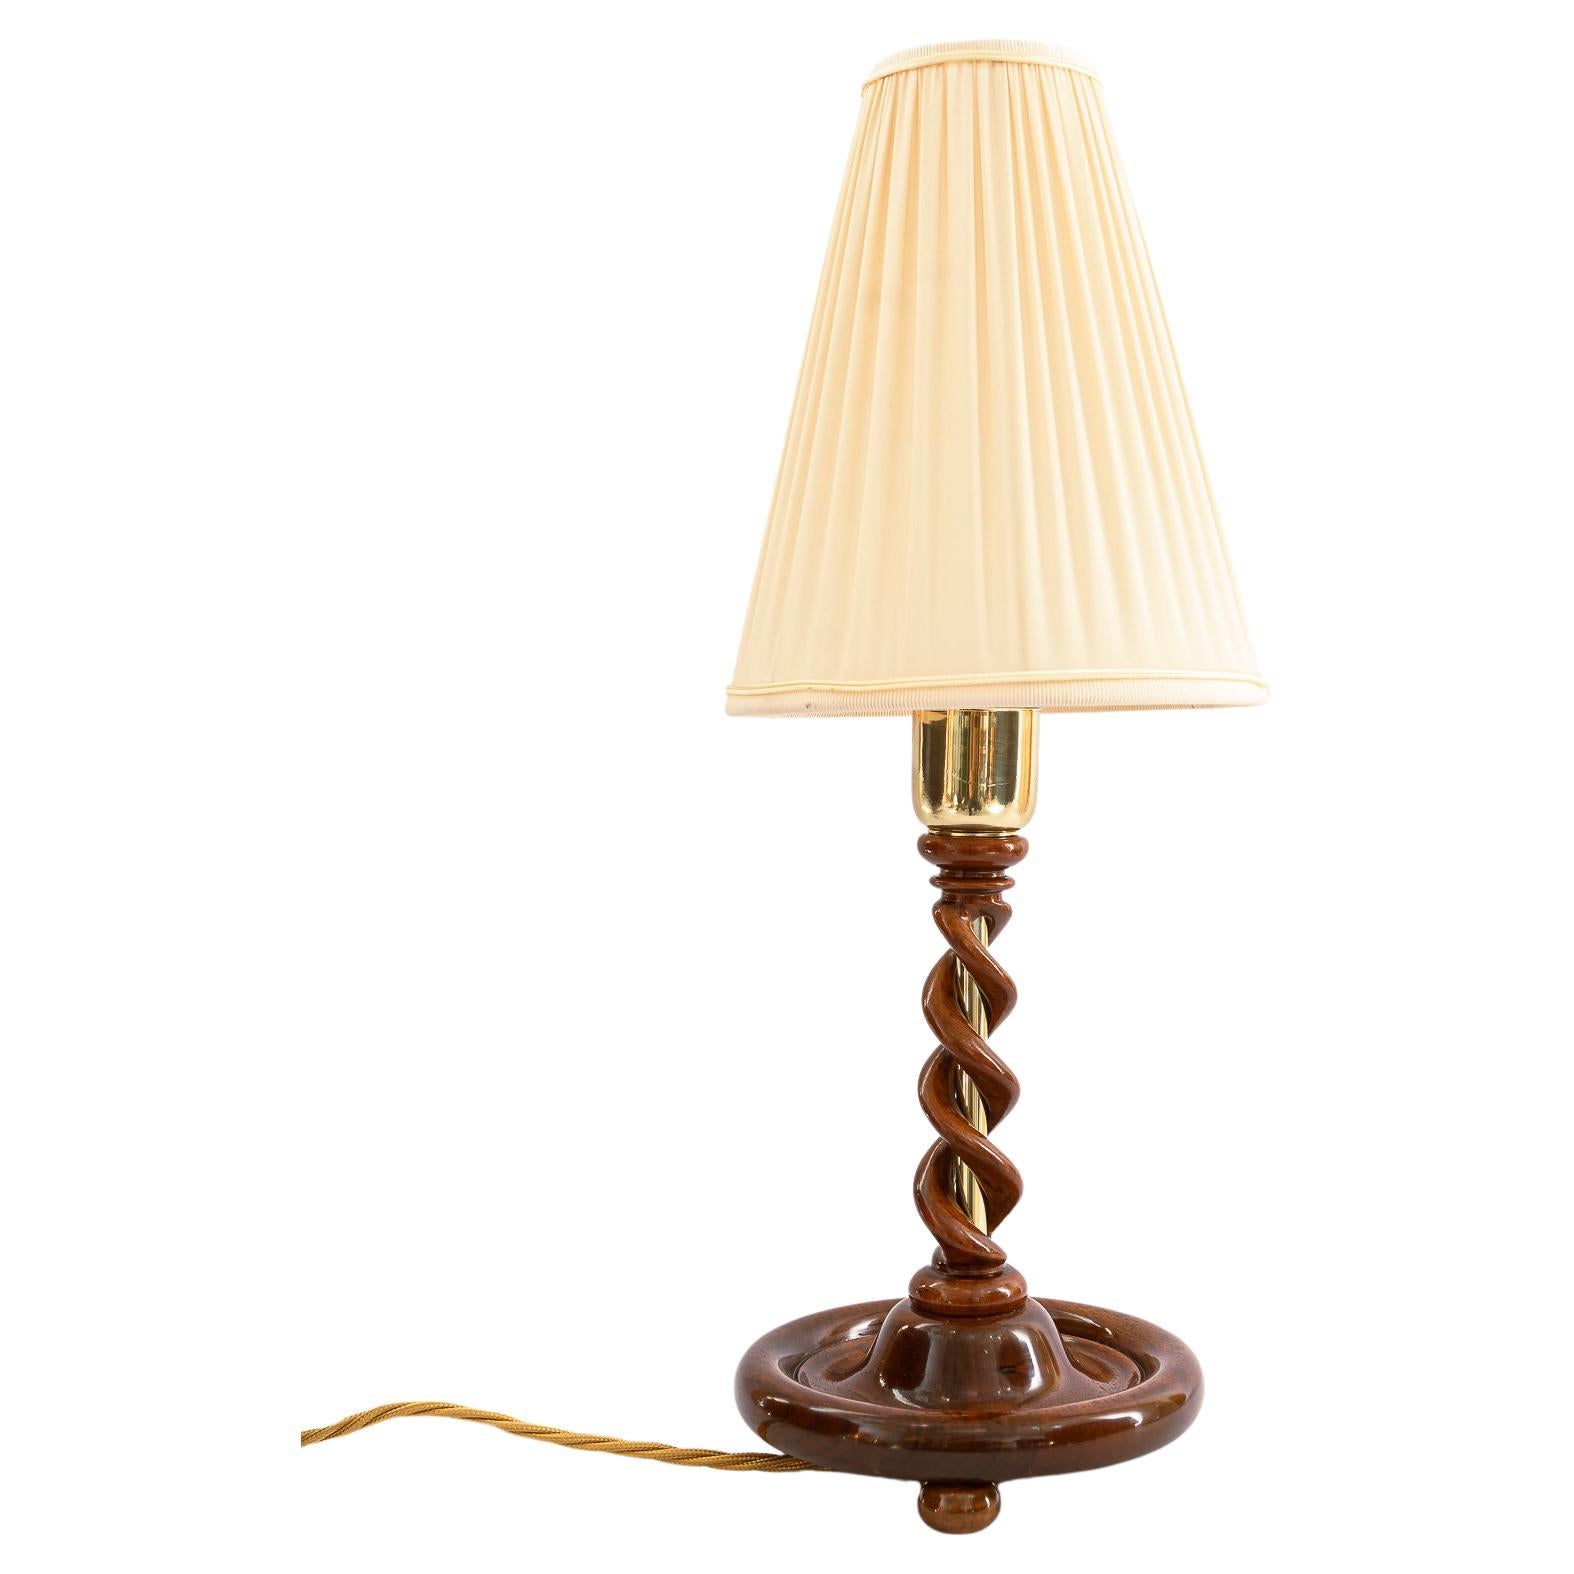 Art Deco Wood Lamp with Fabric Shade, Vienna, Around 1920s For Sale